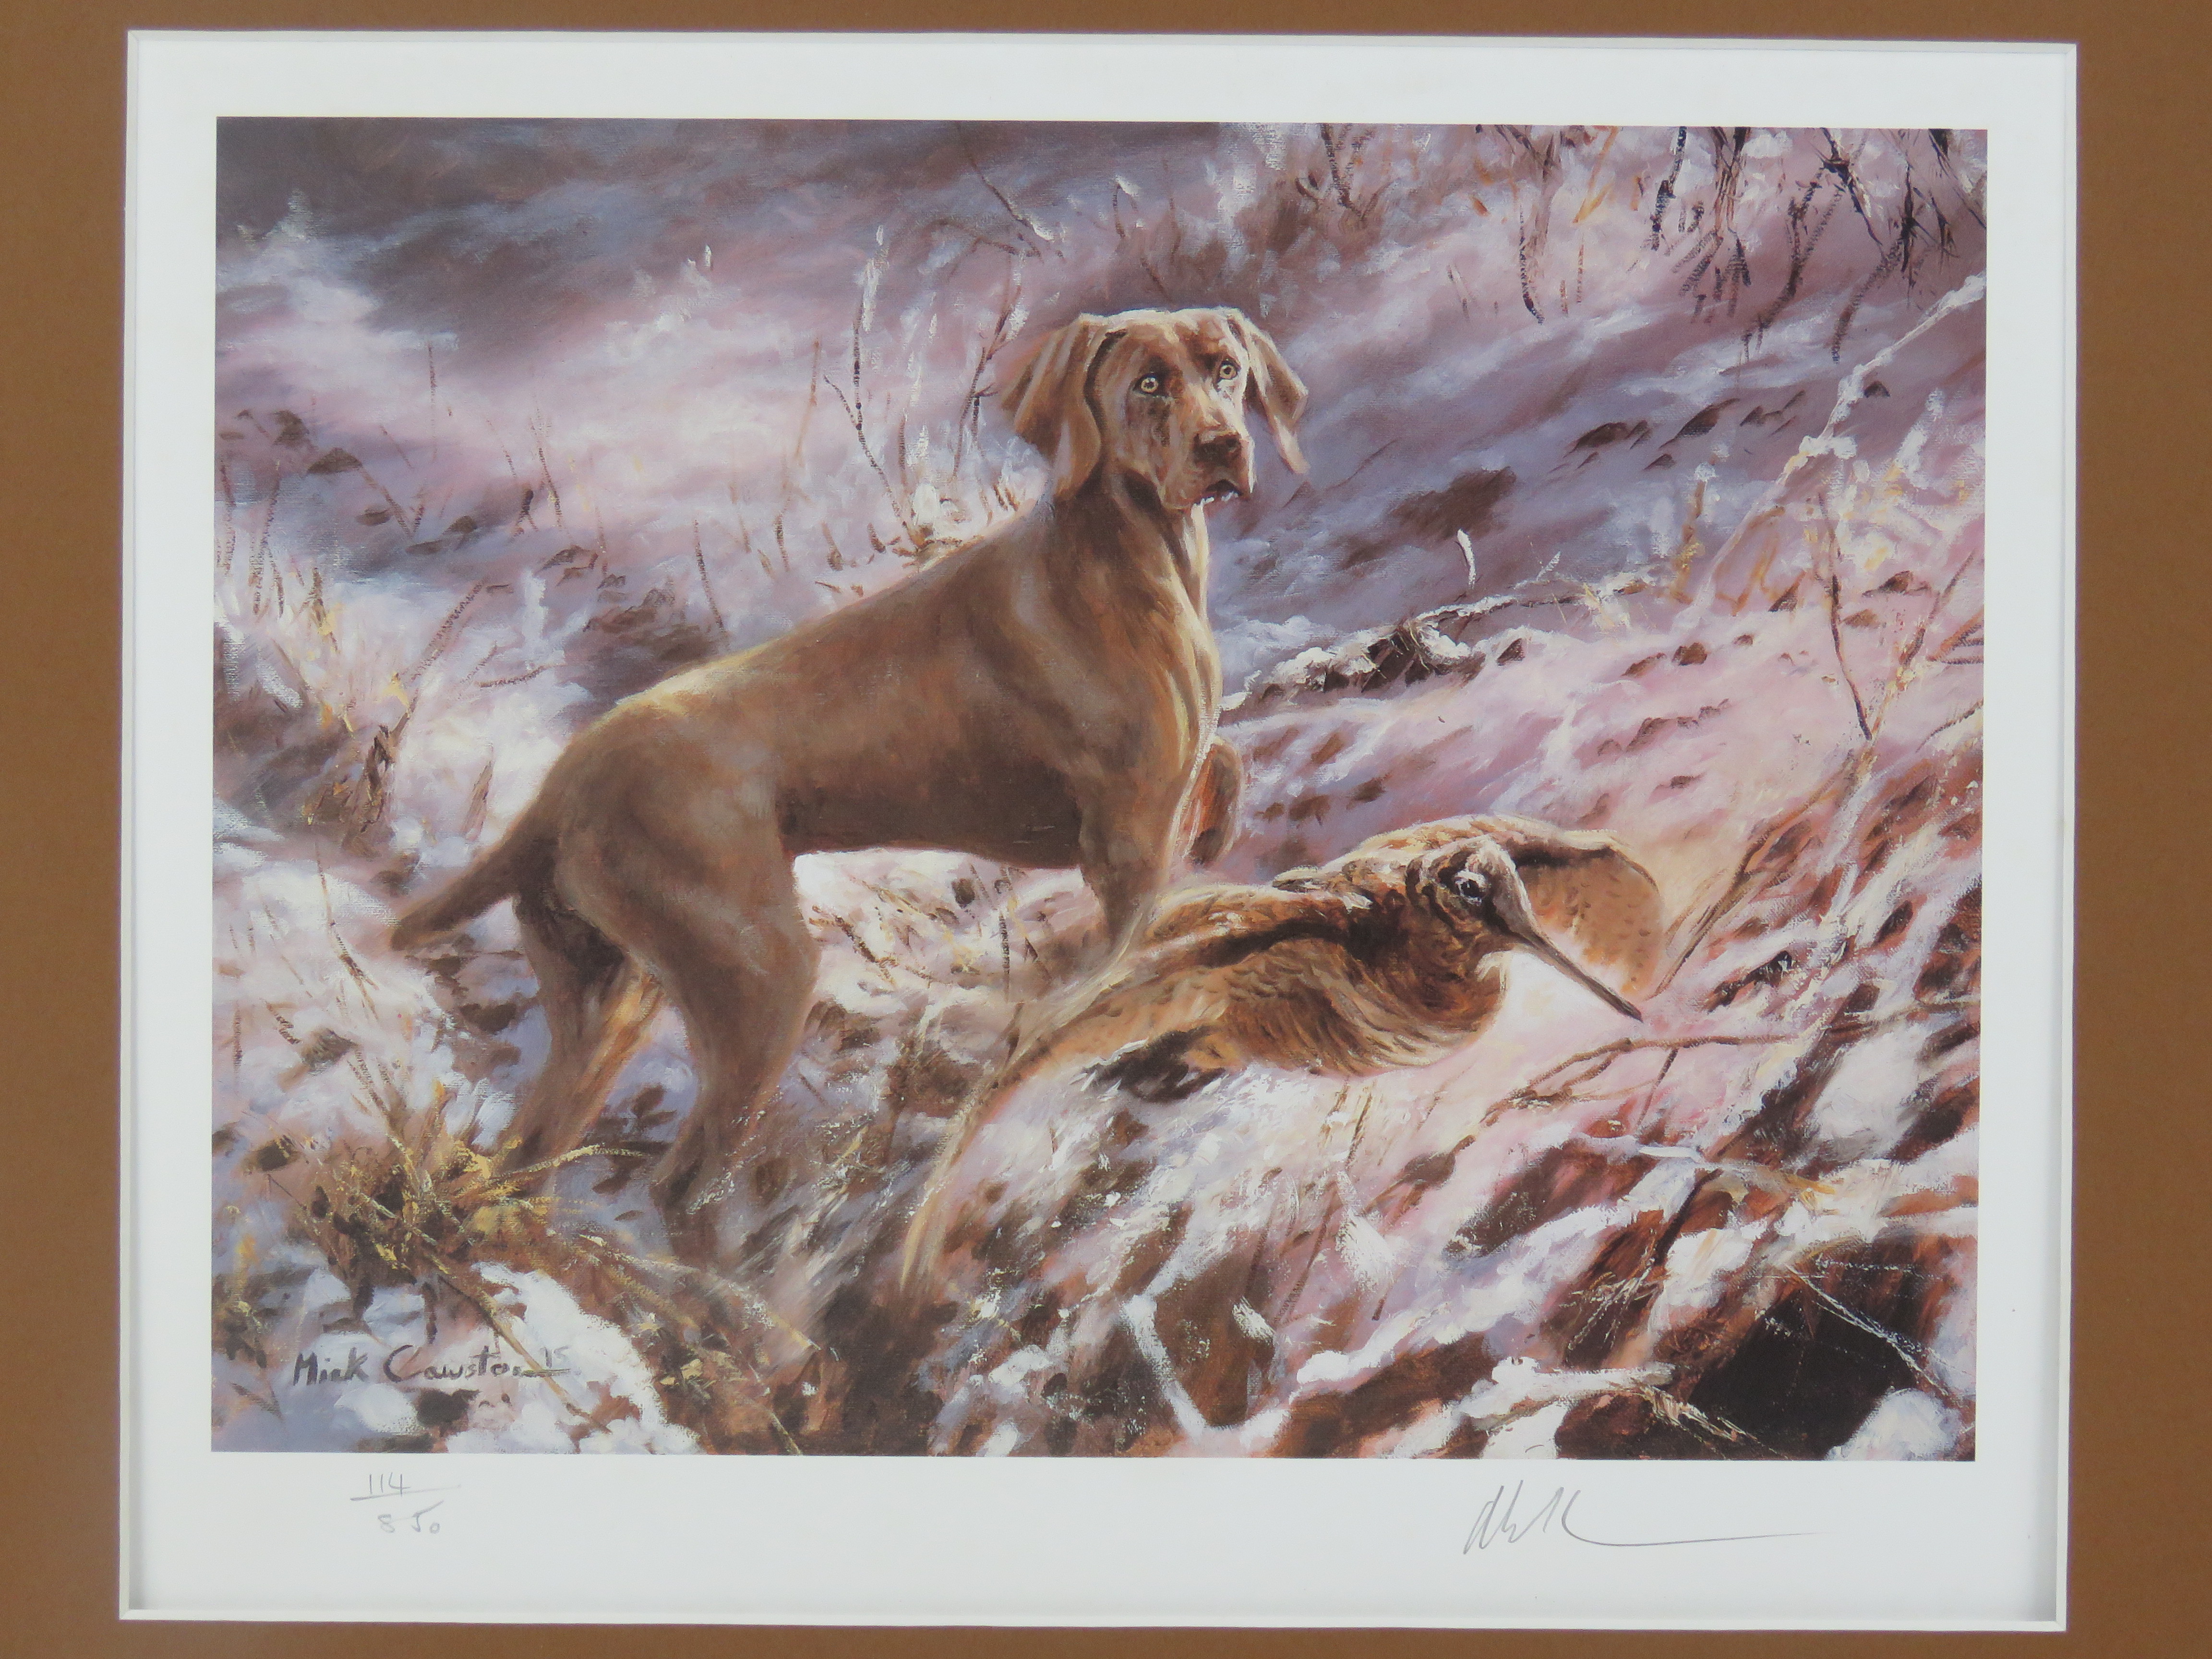 Two signed limited edition Mick Cawston prints of Weimaraners, the larger being No 566/850, - Image 5 of 7